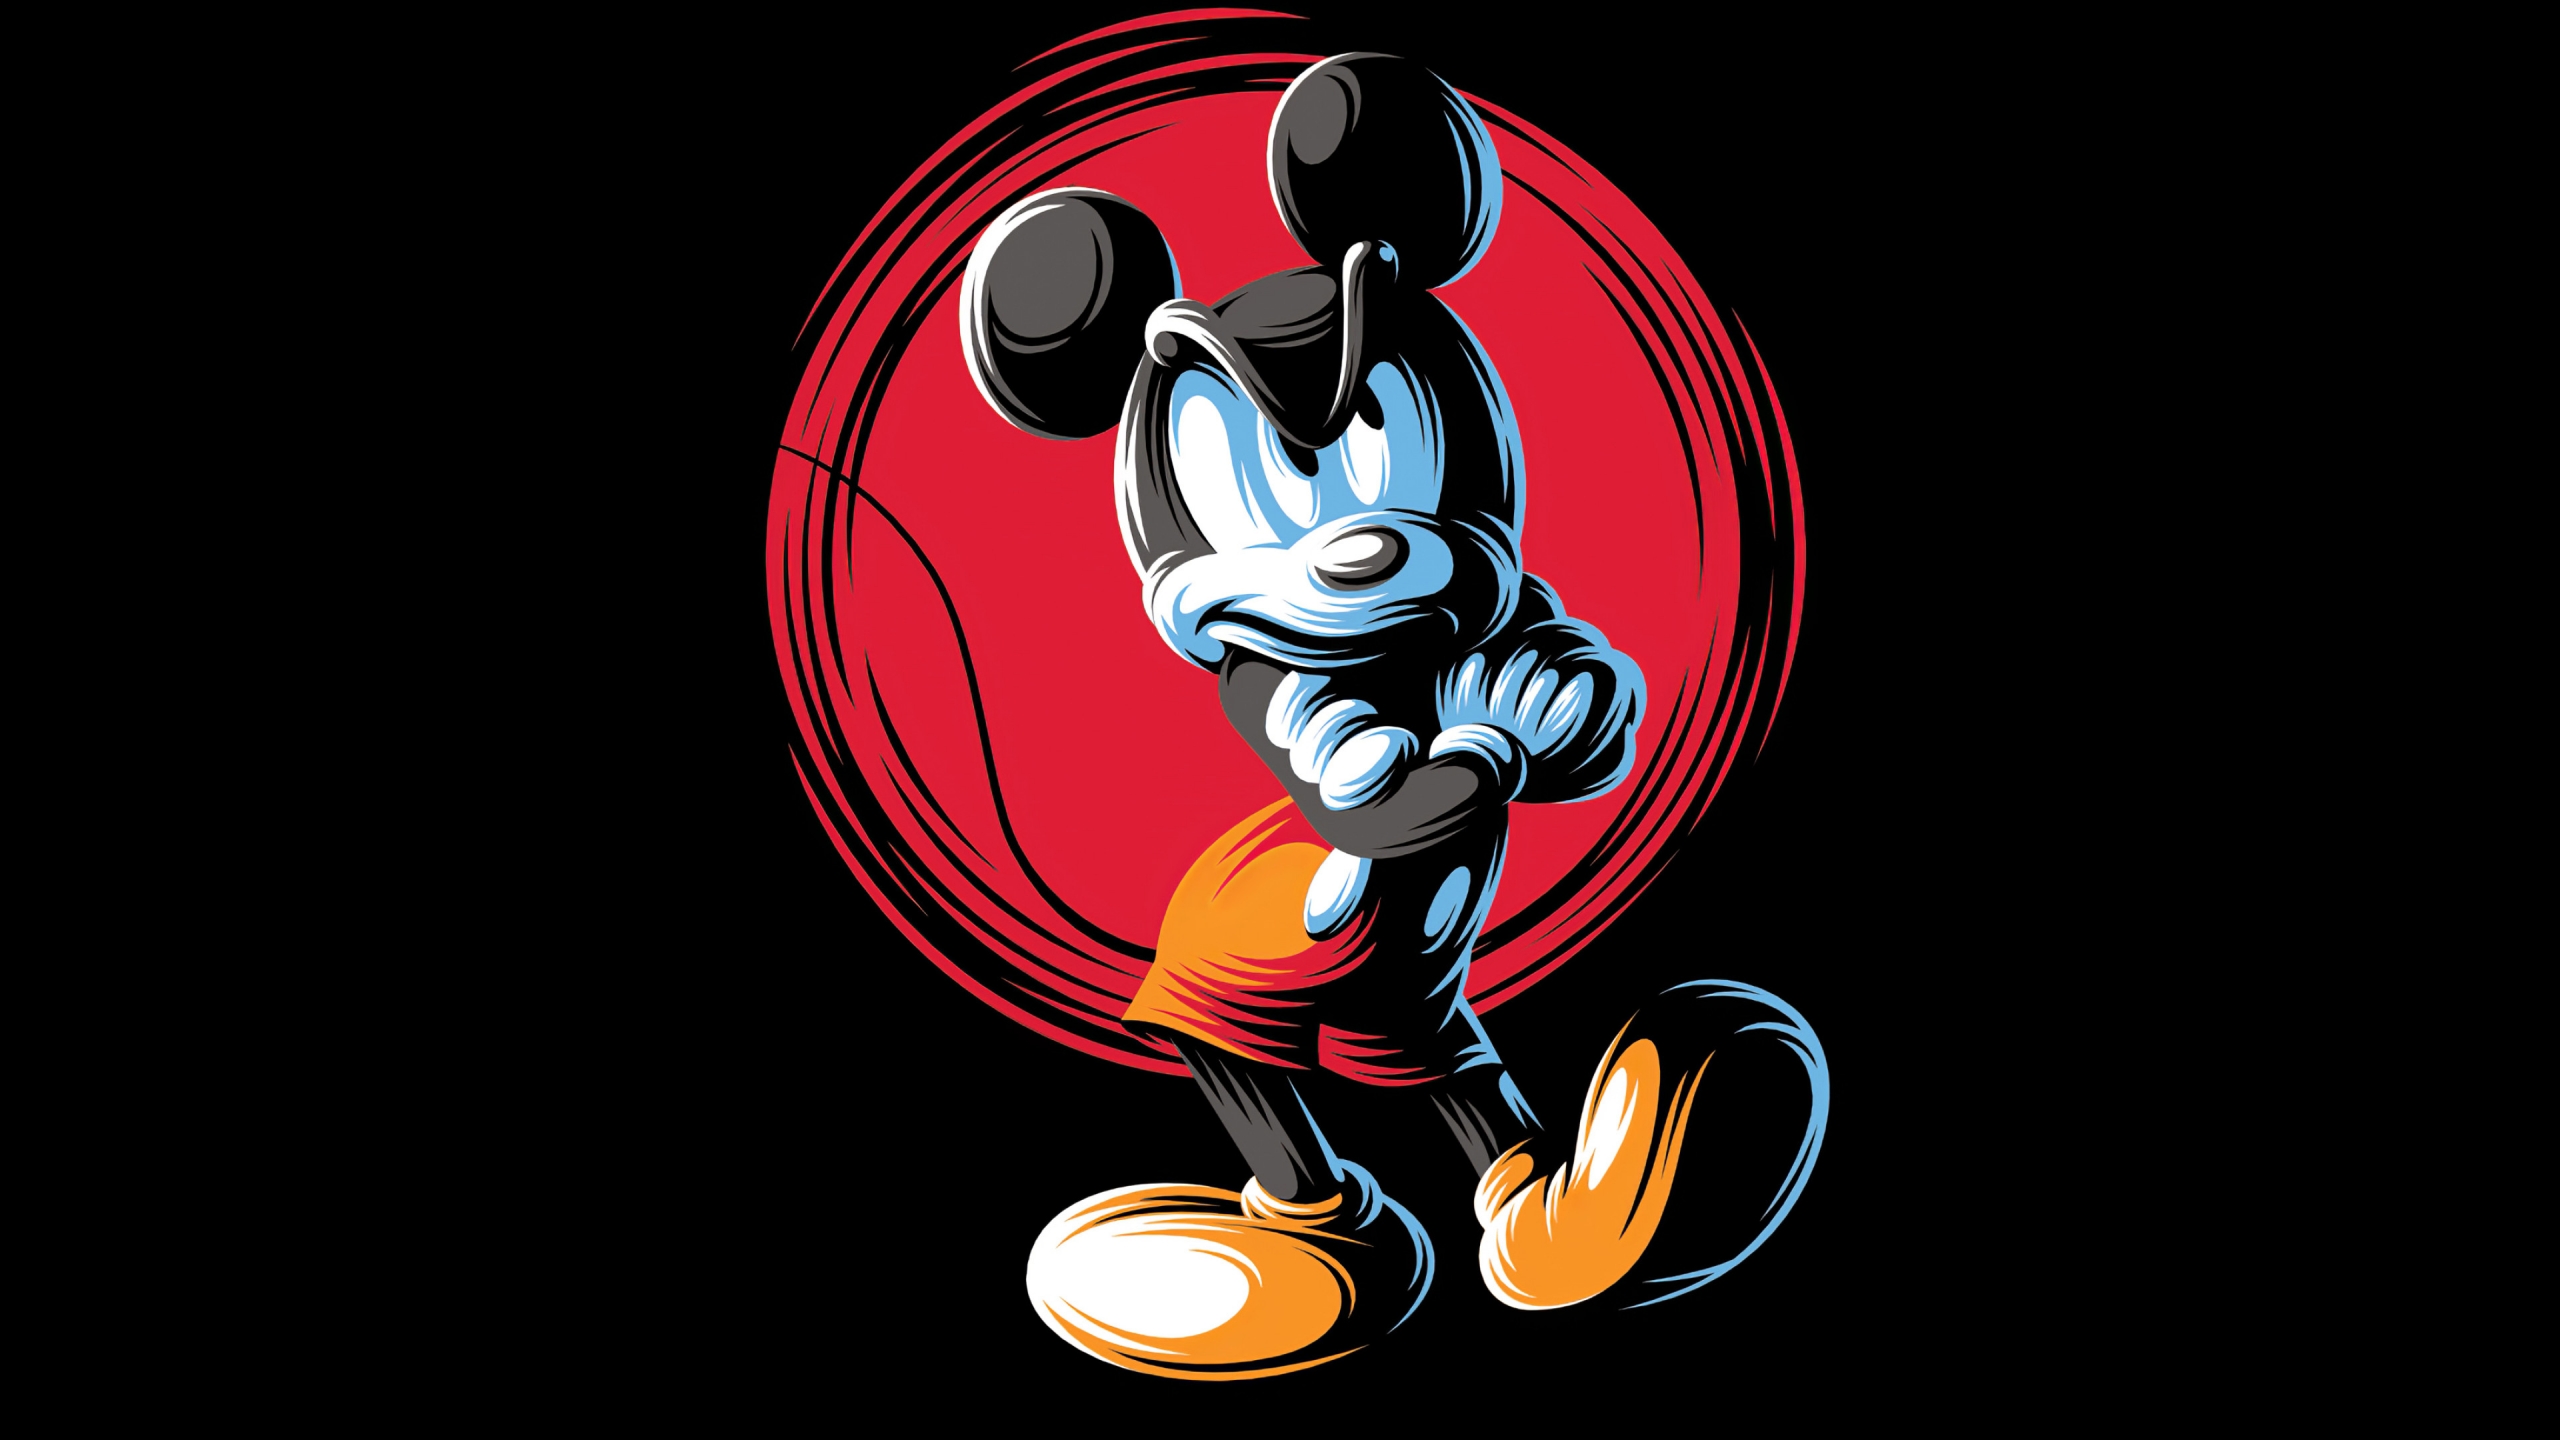 Mickey Mouse angry Wallpaper 4k Ultra HD ID:4764